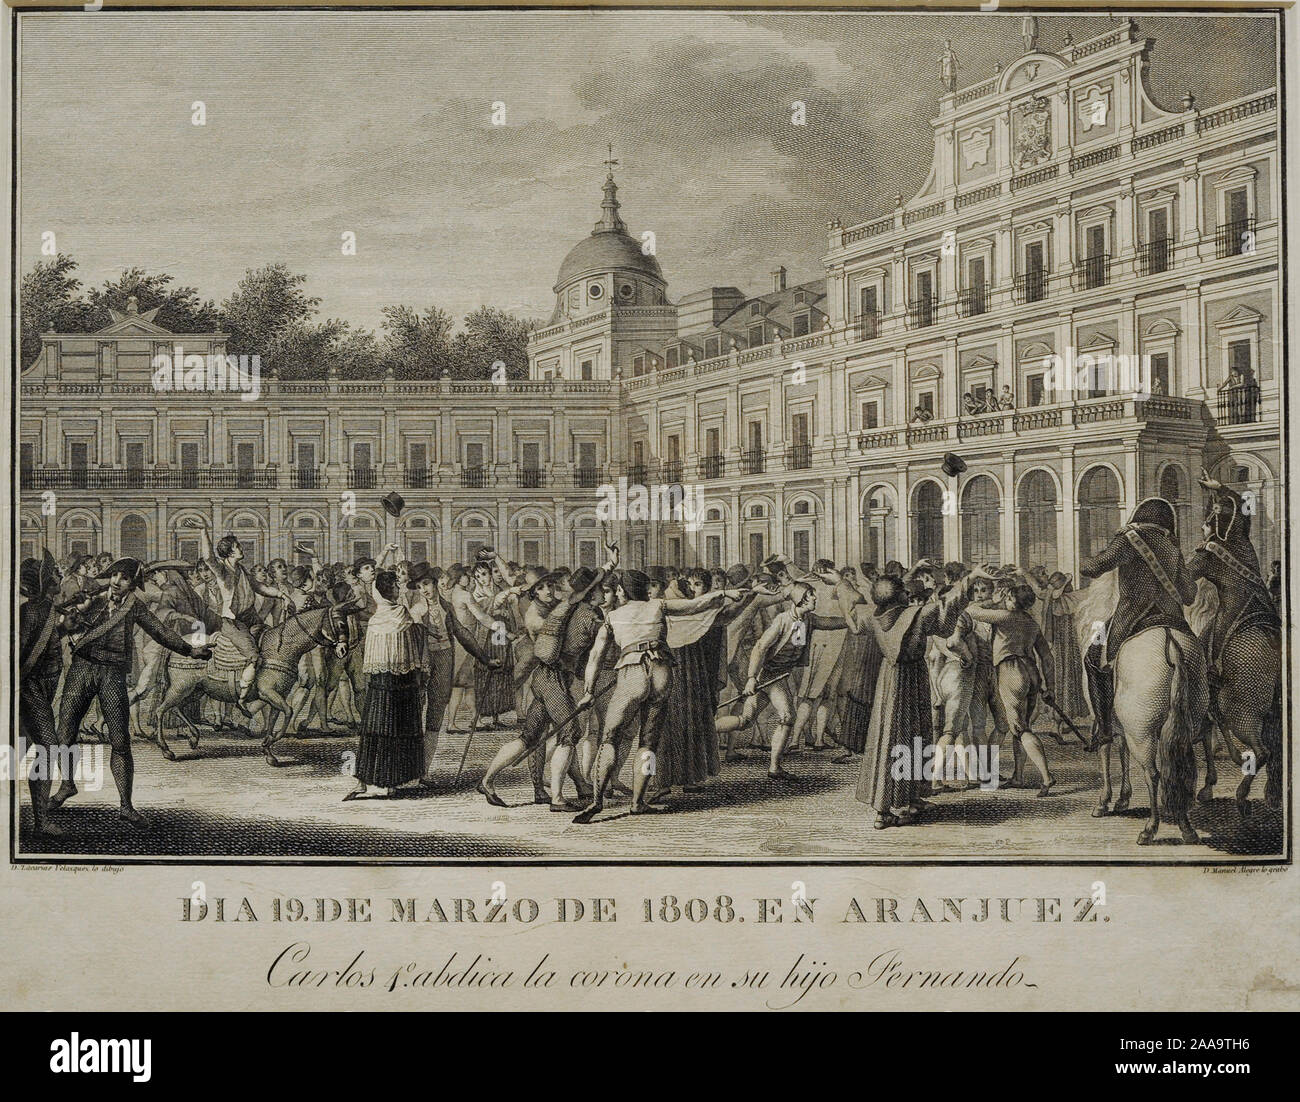 Peninsular War (1808-1814). Charles IV abdicates in favour of his son Ferdinand (Aranjuez, March 19, 1808). Etching and engraving on paper, ca.1814. Engraved by Manuel Alegre (1768-1815) and drawing by Zacarias Gonzalez Velazquez (1763-1834). History Museum. Madrid. Spain. Stock Photo